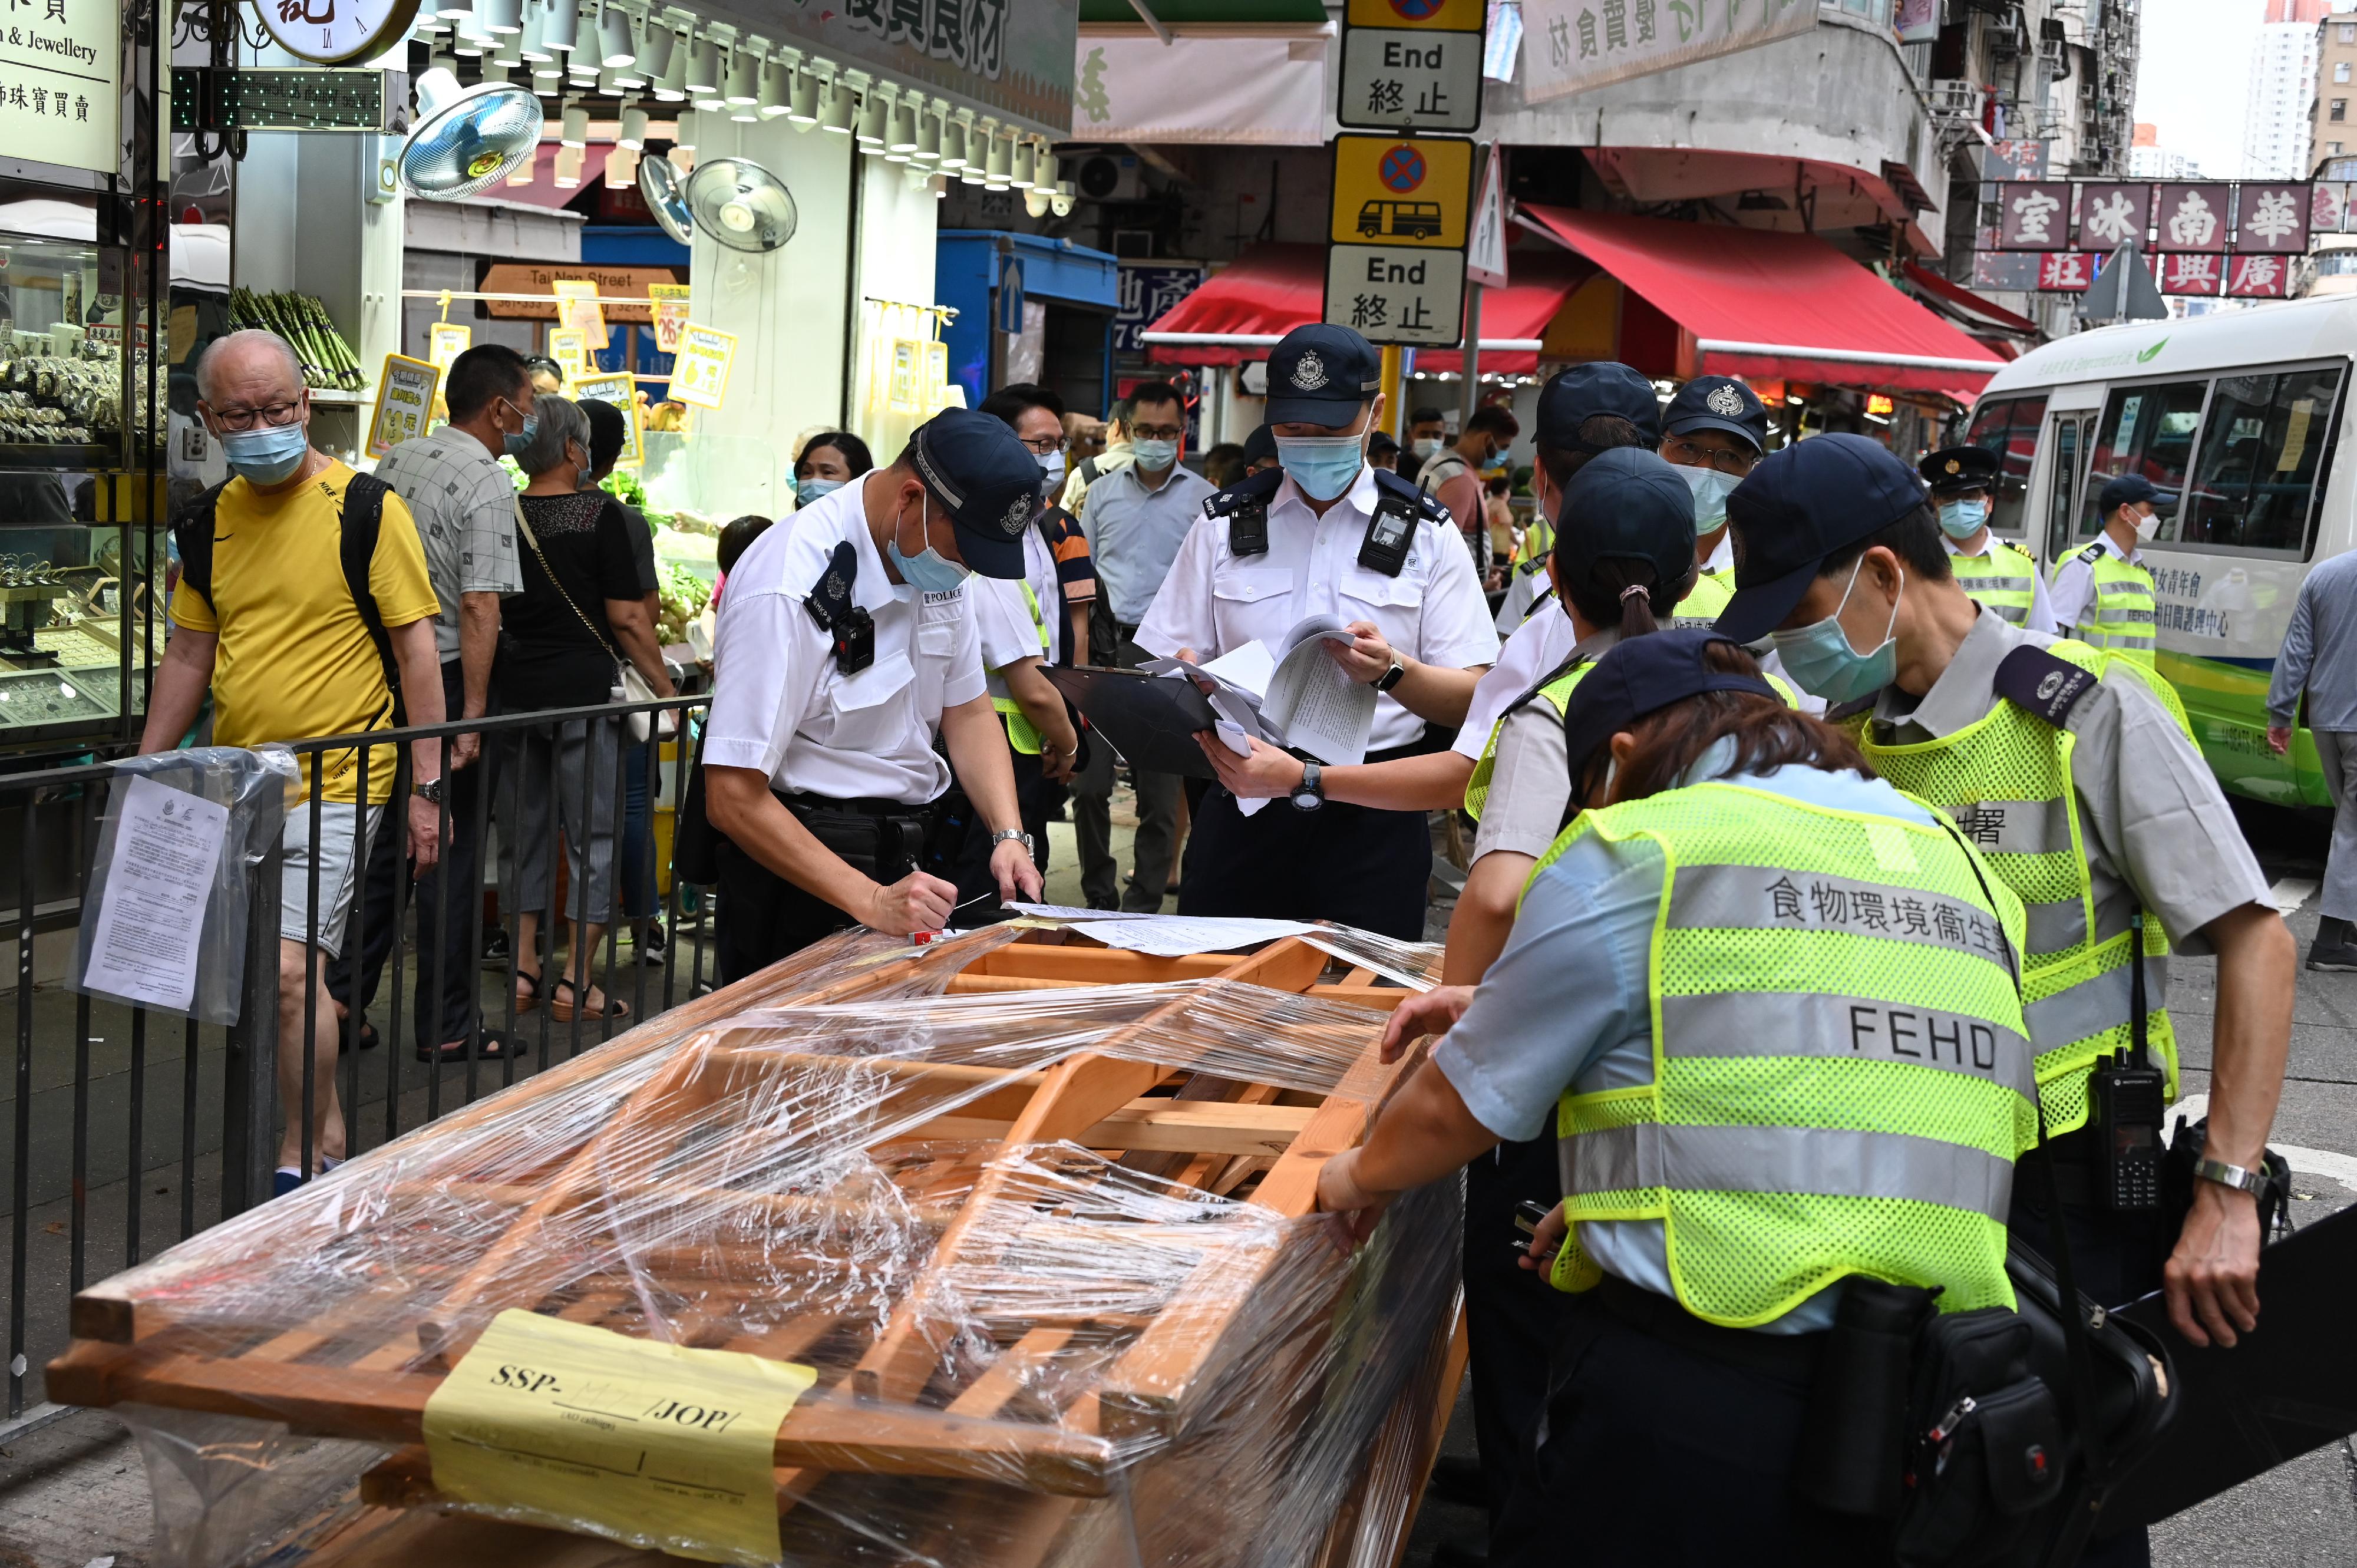 To tackle the illegal shop extension and obstruction problems, the Food and Environmental Hygiene Department (FEHD) and the Police formally launched the second phase of the trial scheme since June 7 (Tuesday) in Sham Shui Po, Yuen Long and Eastern Districts, to conduct joint operations with new enforcement strategy. Photo shows the joint operation of the FEHD and the Police in Sham Shui Po.